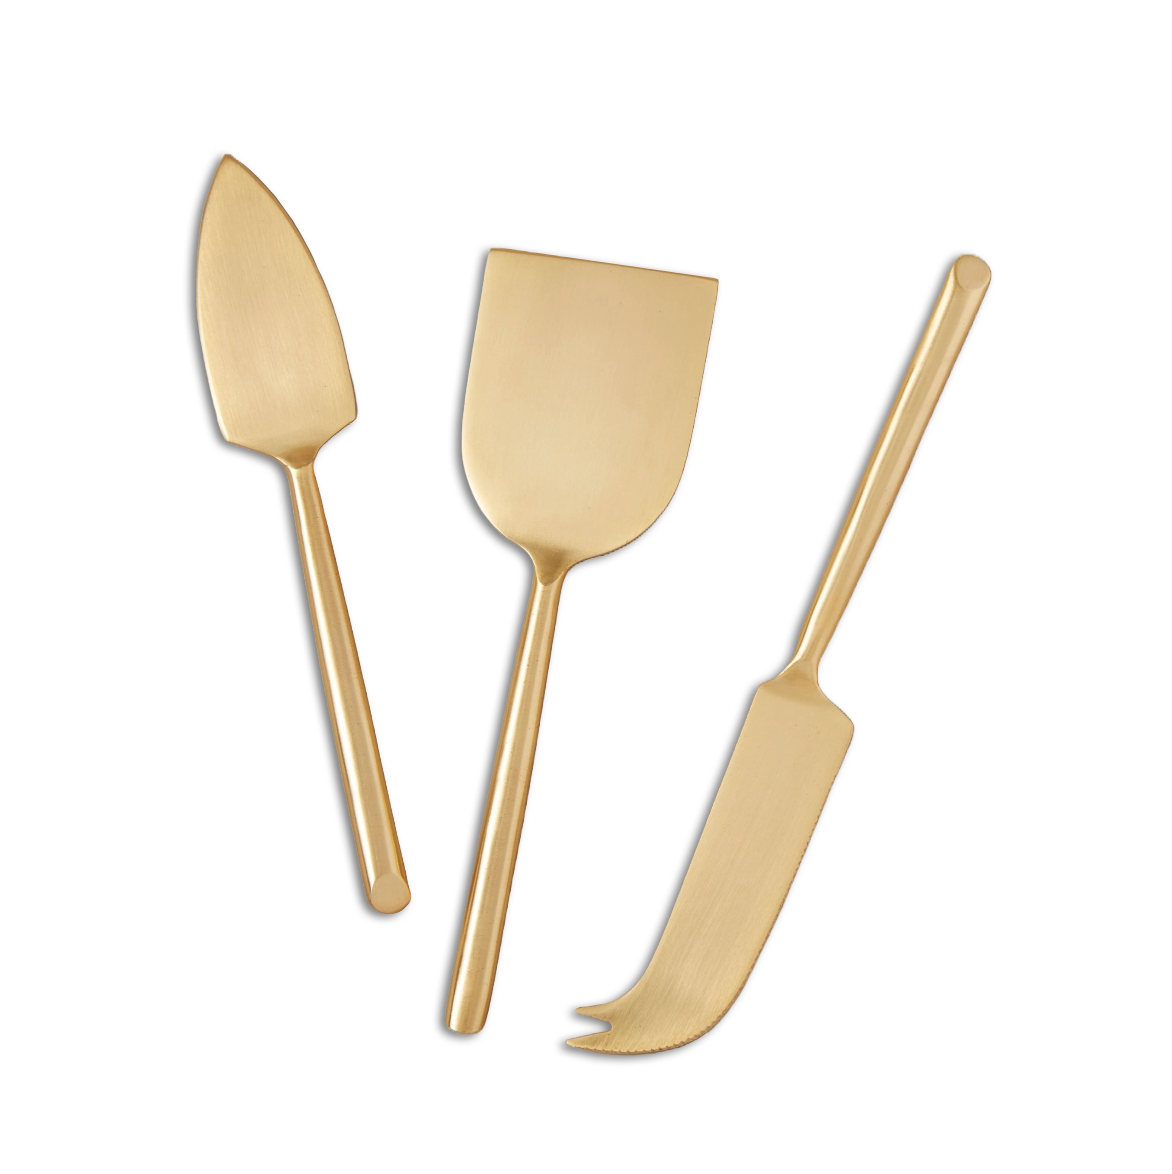 Cheese Servers in Matte Gold, Set of 3